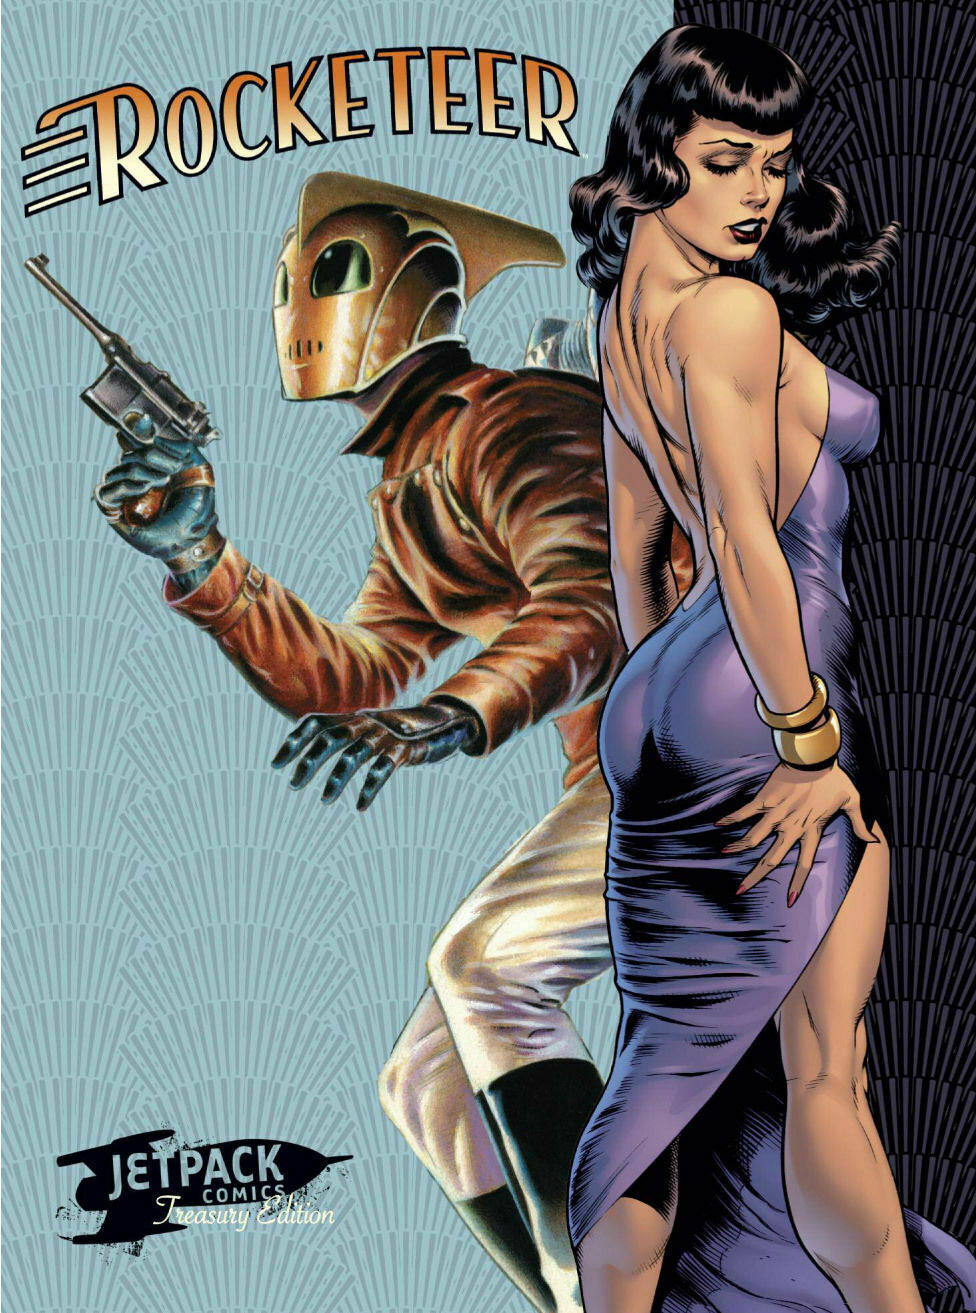 ROCKETEER JETPACK TREASURY EDITION XX limited Bettie Page Edition Betty Page HOT